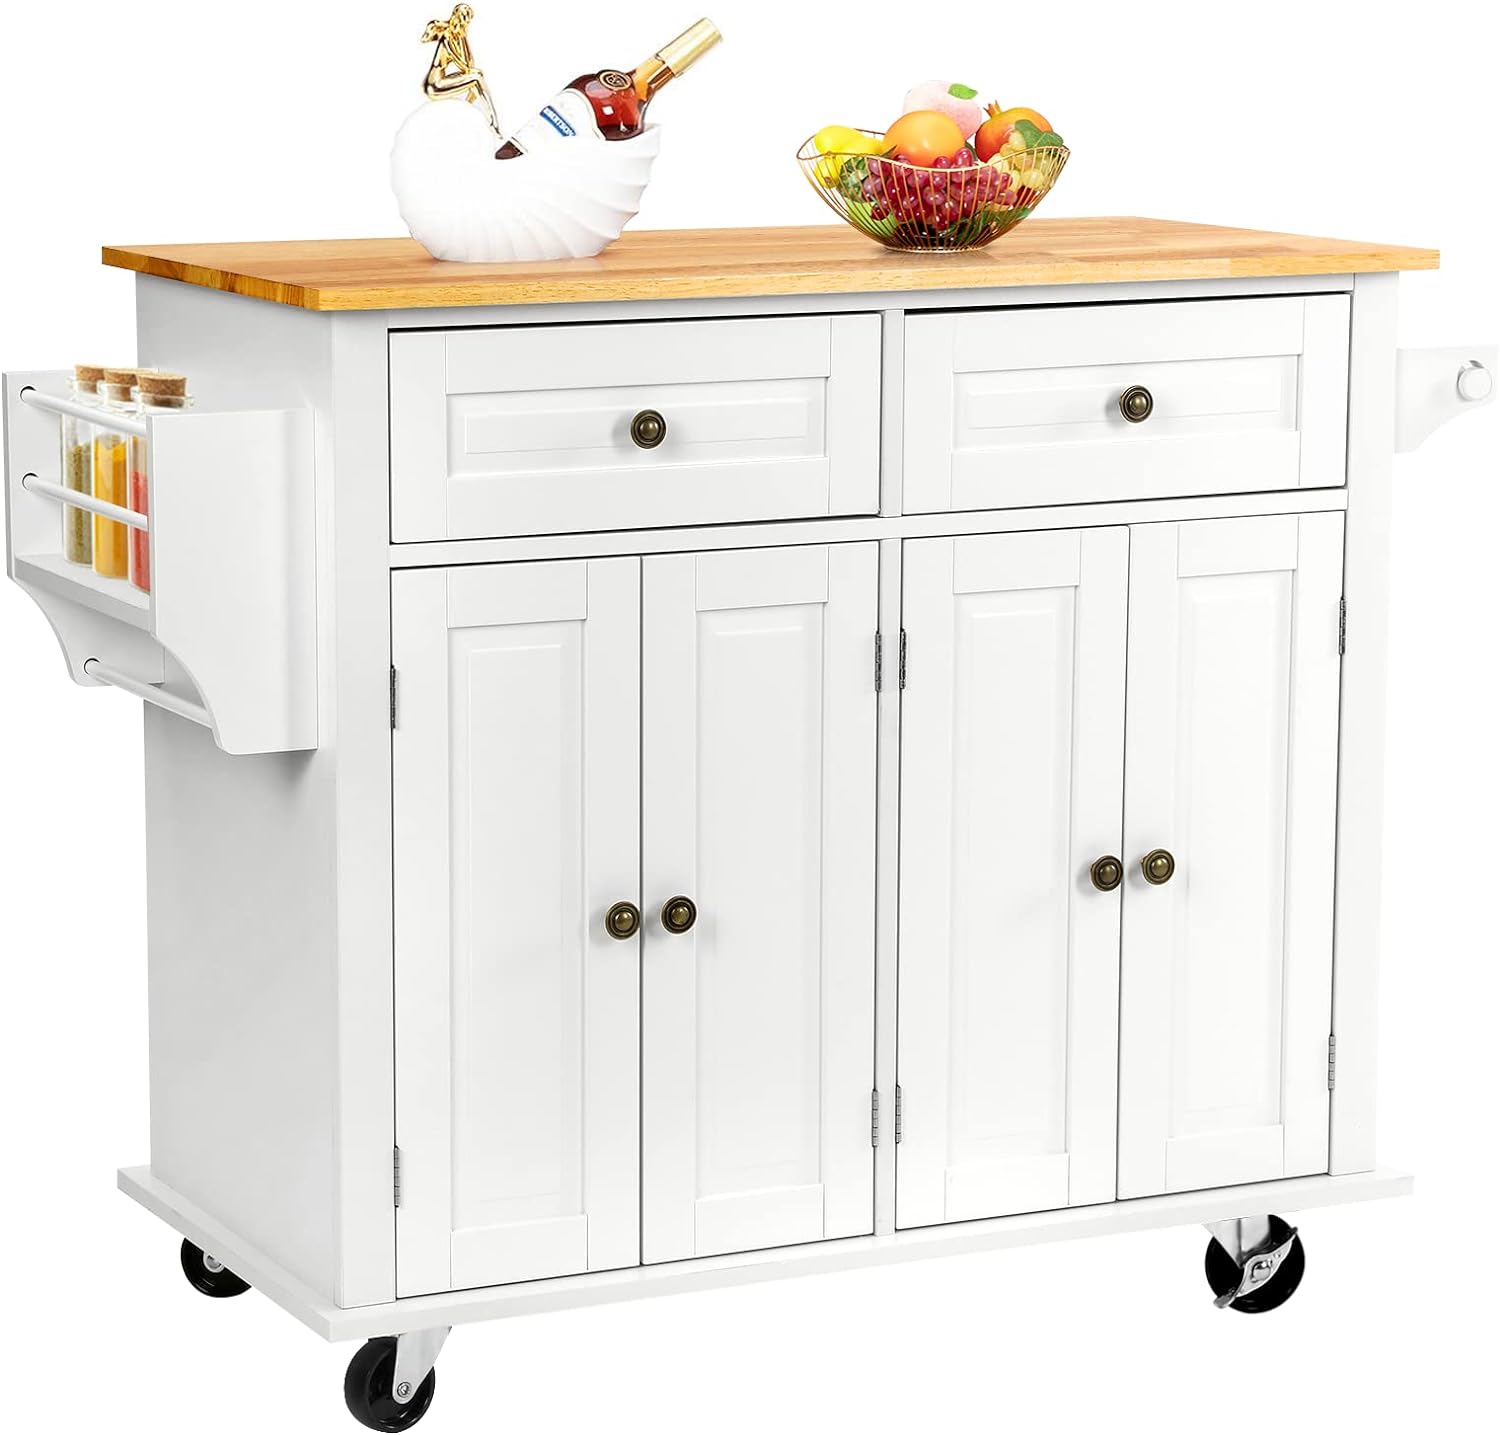 TUSY 43 Kitchen Island with Storage, Rolling Kitchen Cart with Lockable Wheels, Solid Wood Tabletop Kitchen Island Table for Kitchen, Living Room, White